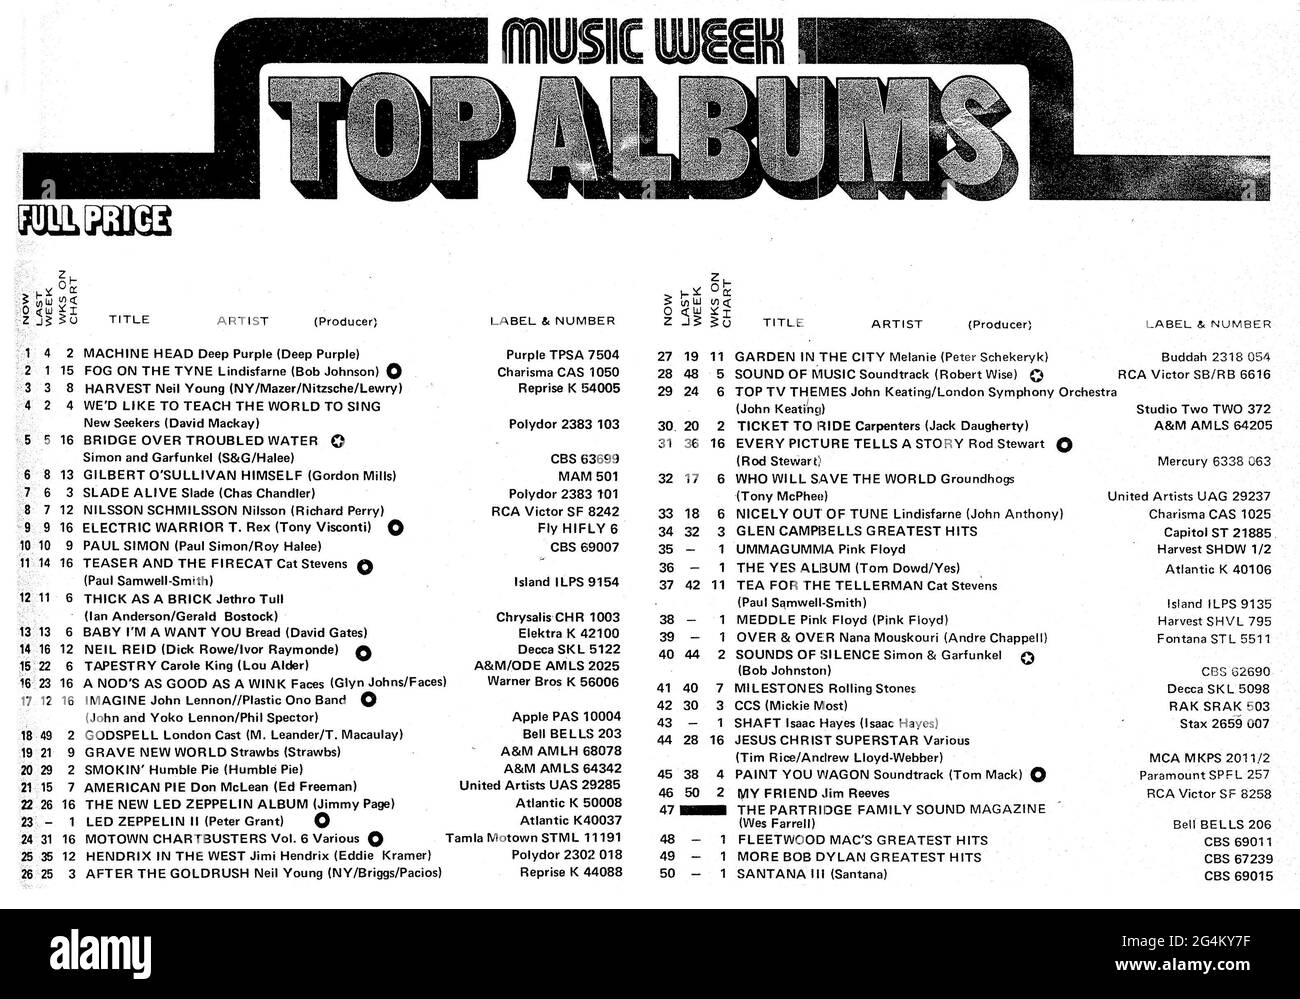 Top Fifty album chart UK April 22. 1972 with big bands like Deep Purple, Led Zeppelin, Jethro Tull, Neil Young, Jimi Hendrix. A great snapshot of the British album chart at the height of the rock scene.  Scanned from an actual music newspaper. Stock Photo